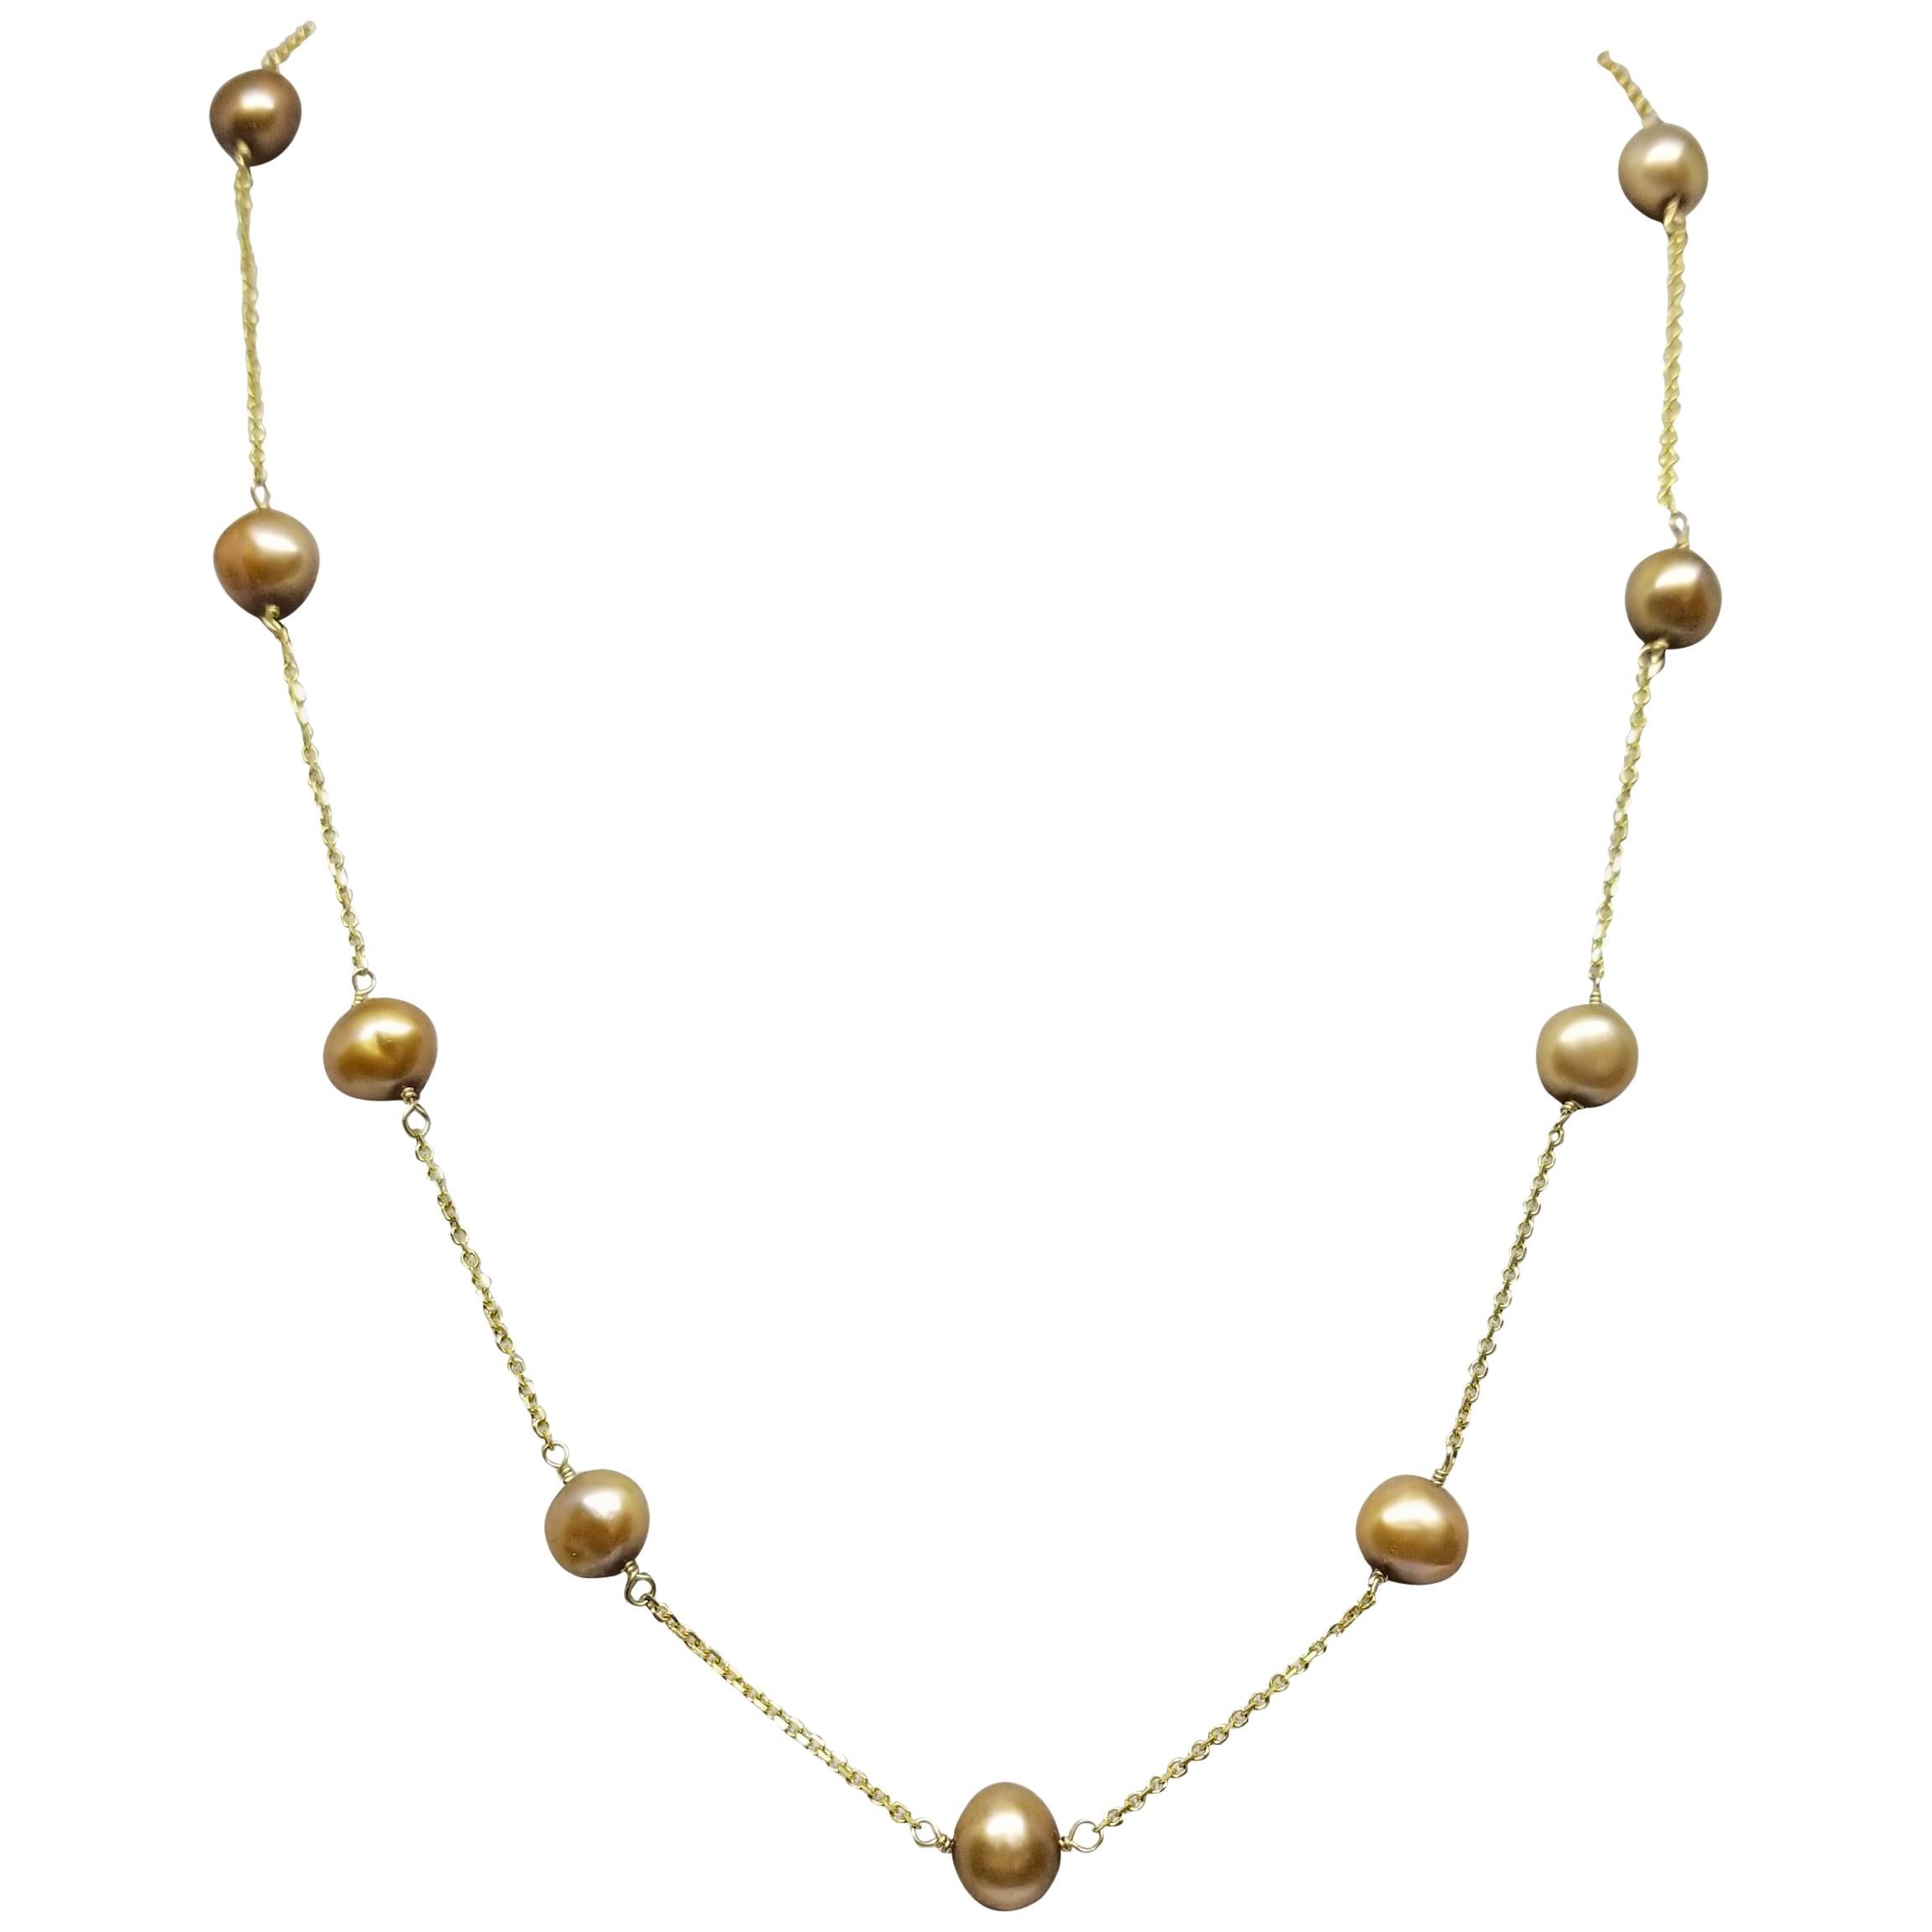 14 Karat "Pearl and Chain" Necklace with Fresh Water Golden Pearls